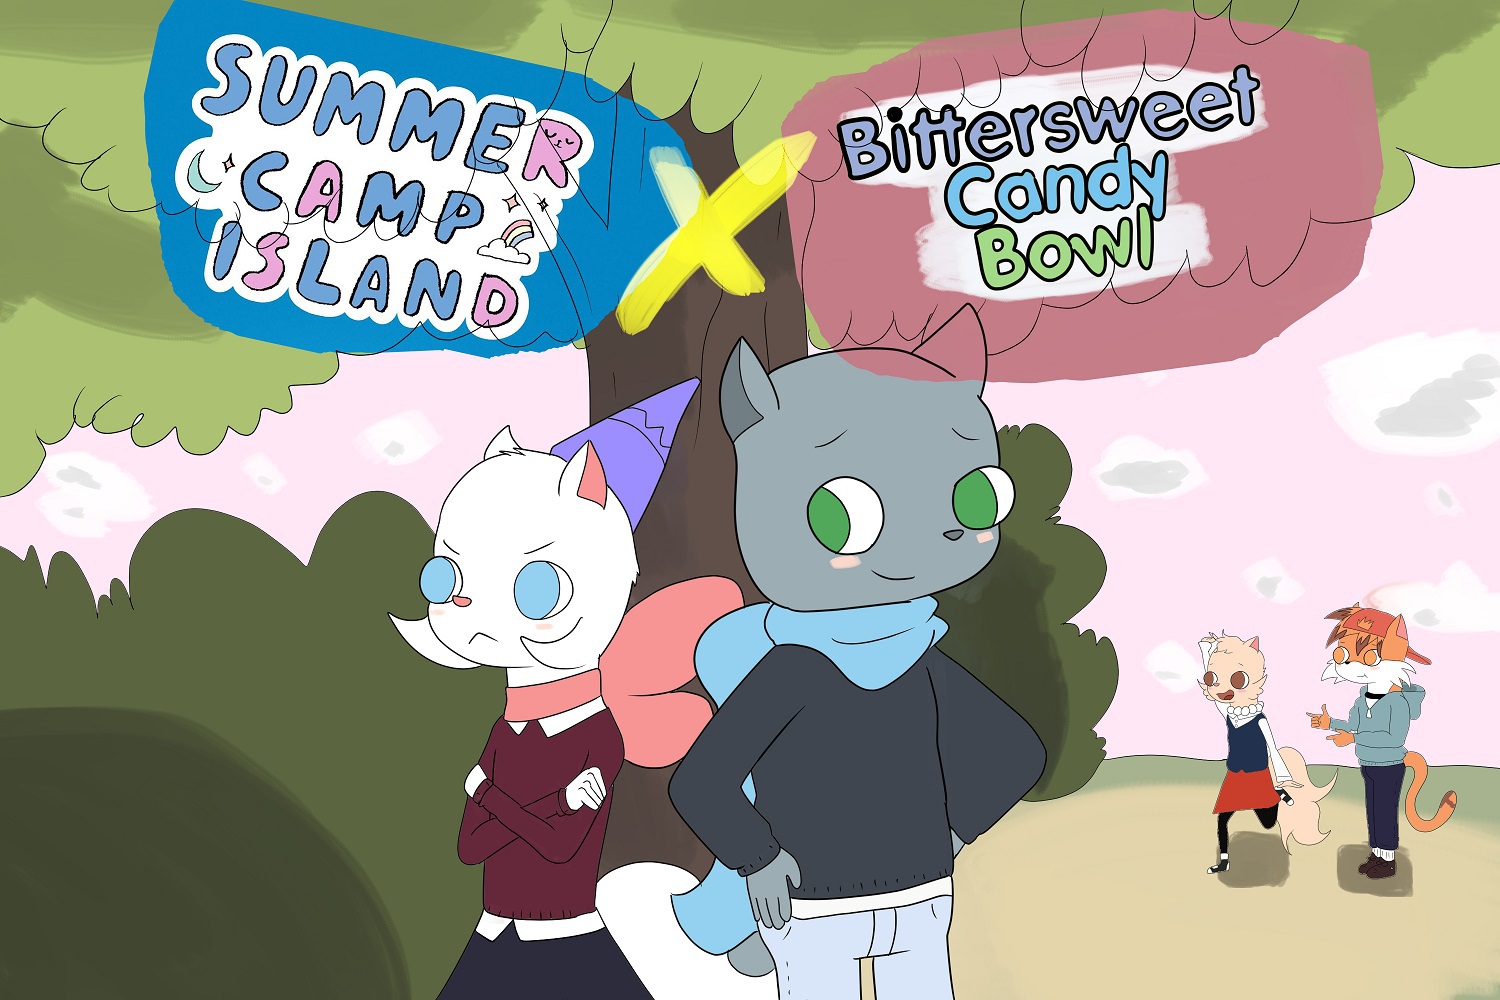 Candybooru image #15287, tagged with Daisy Lucy Mike Paulo Peshy_(Artist) parody summer_camp_island